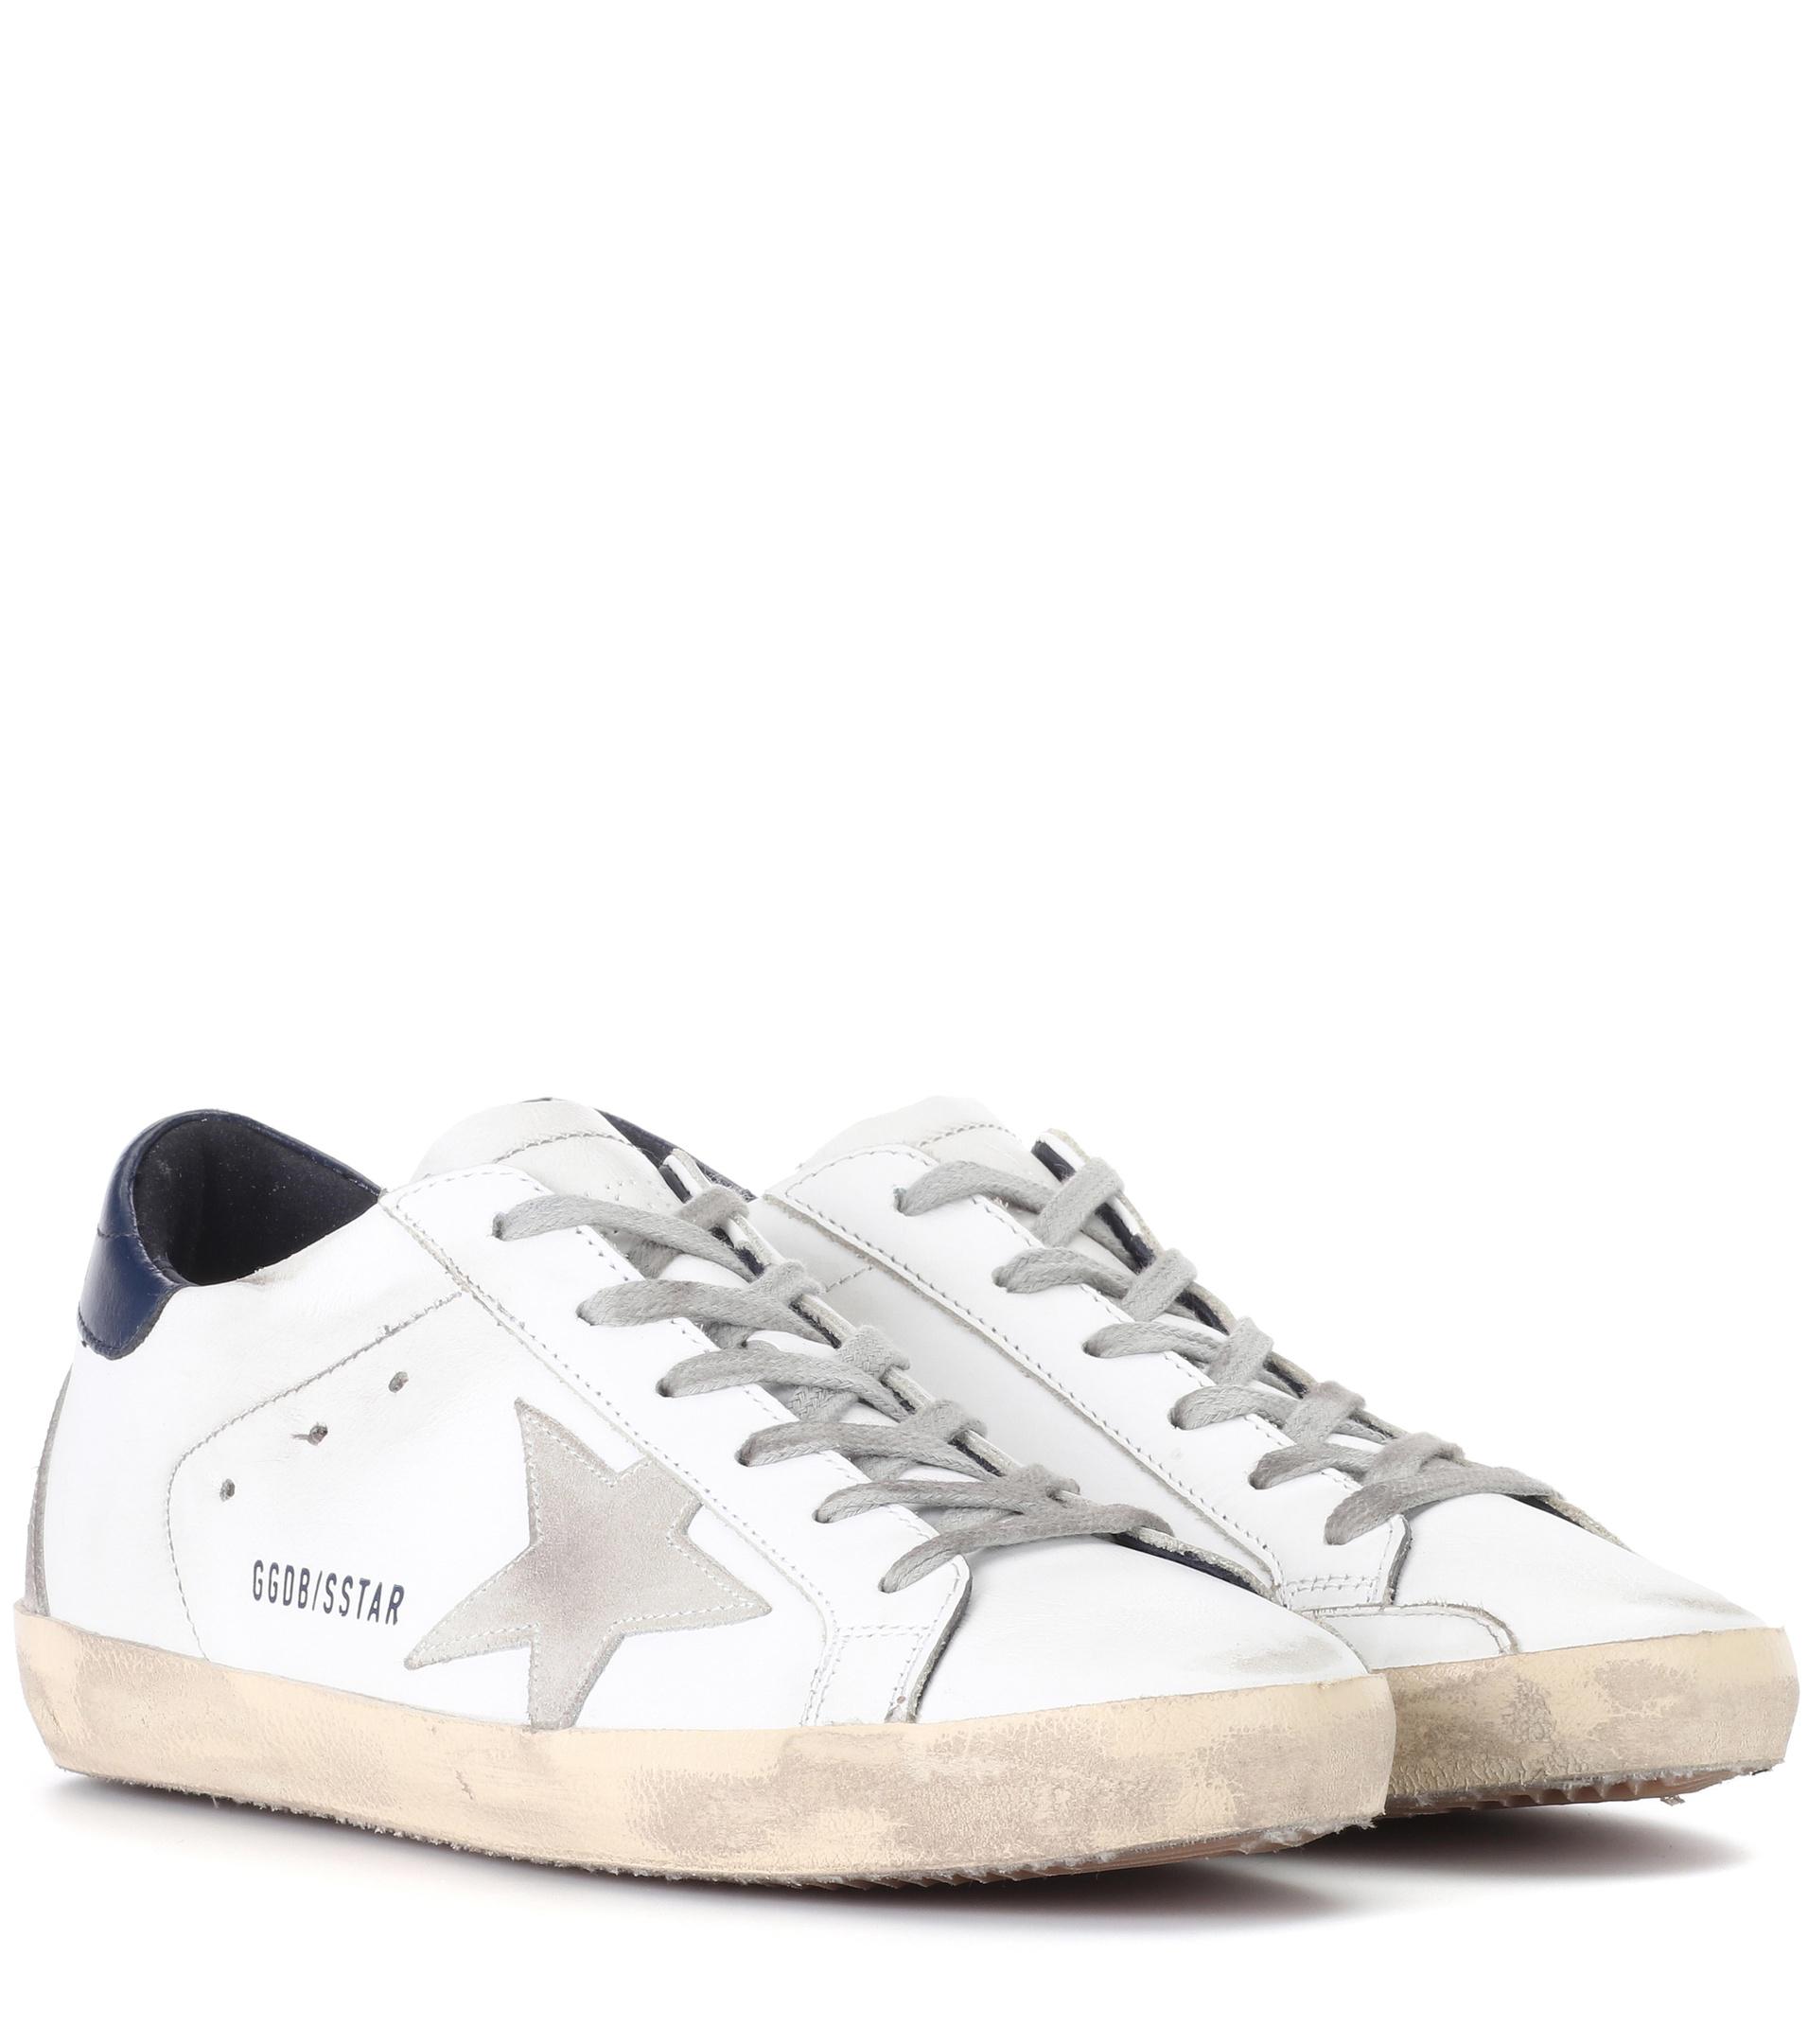 Golden Goose Deluxe Brand Superstar Leather Sneakers in White - Lyst